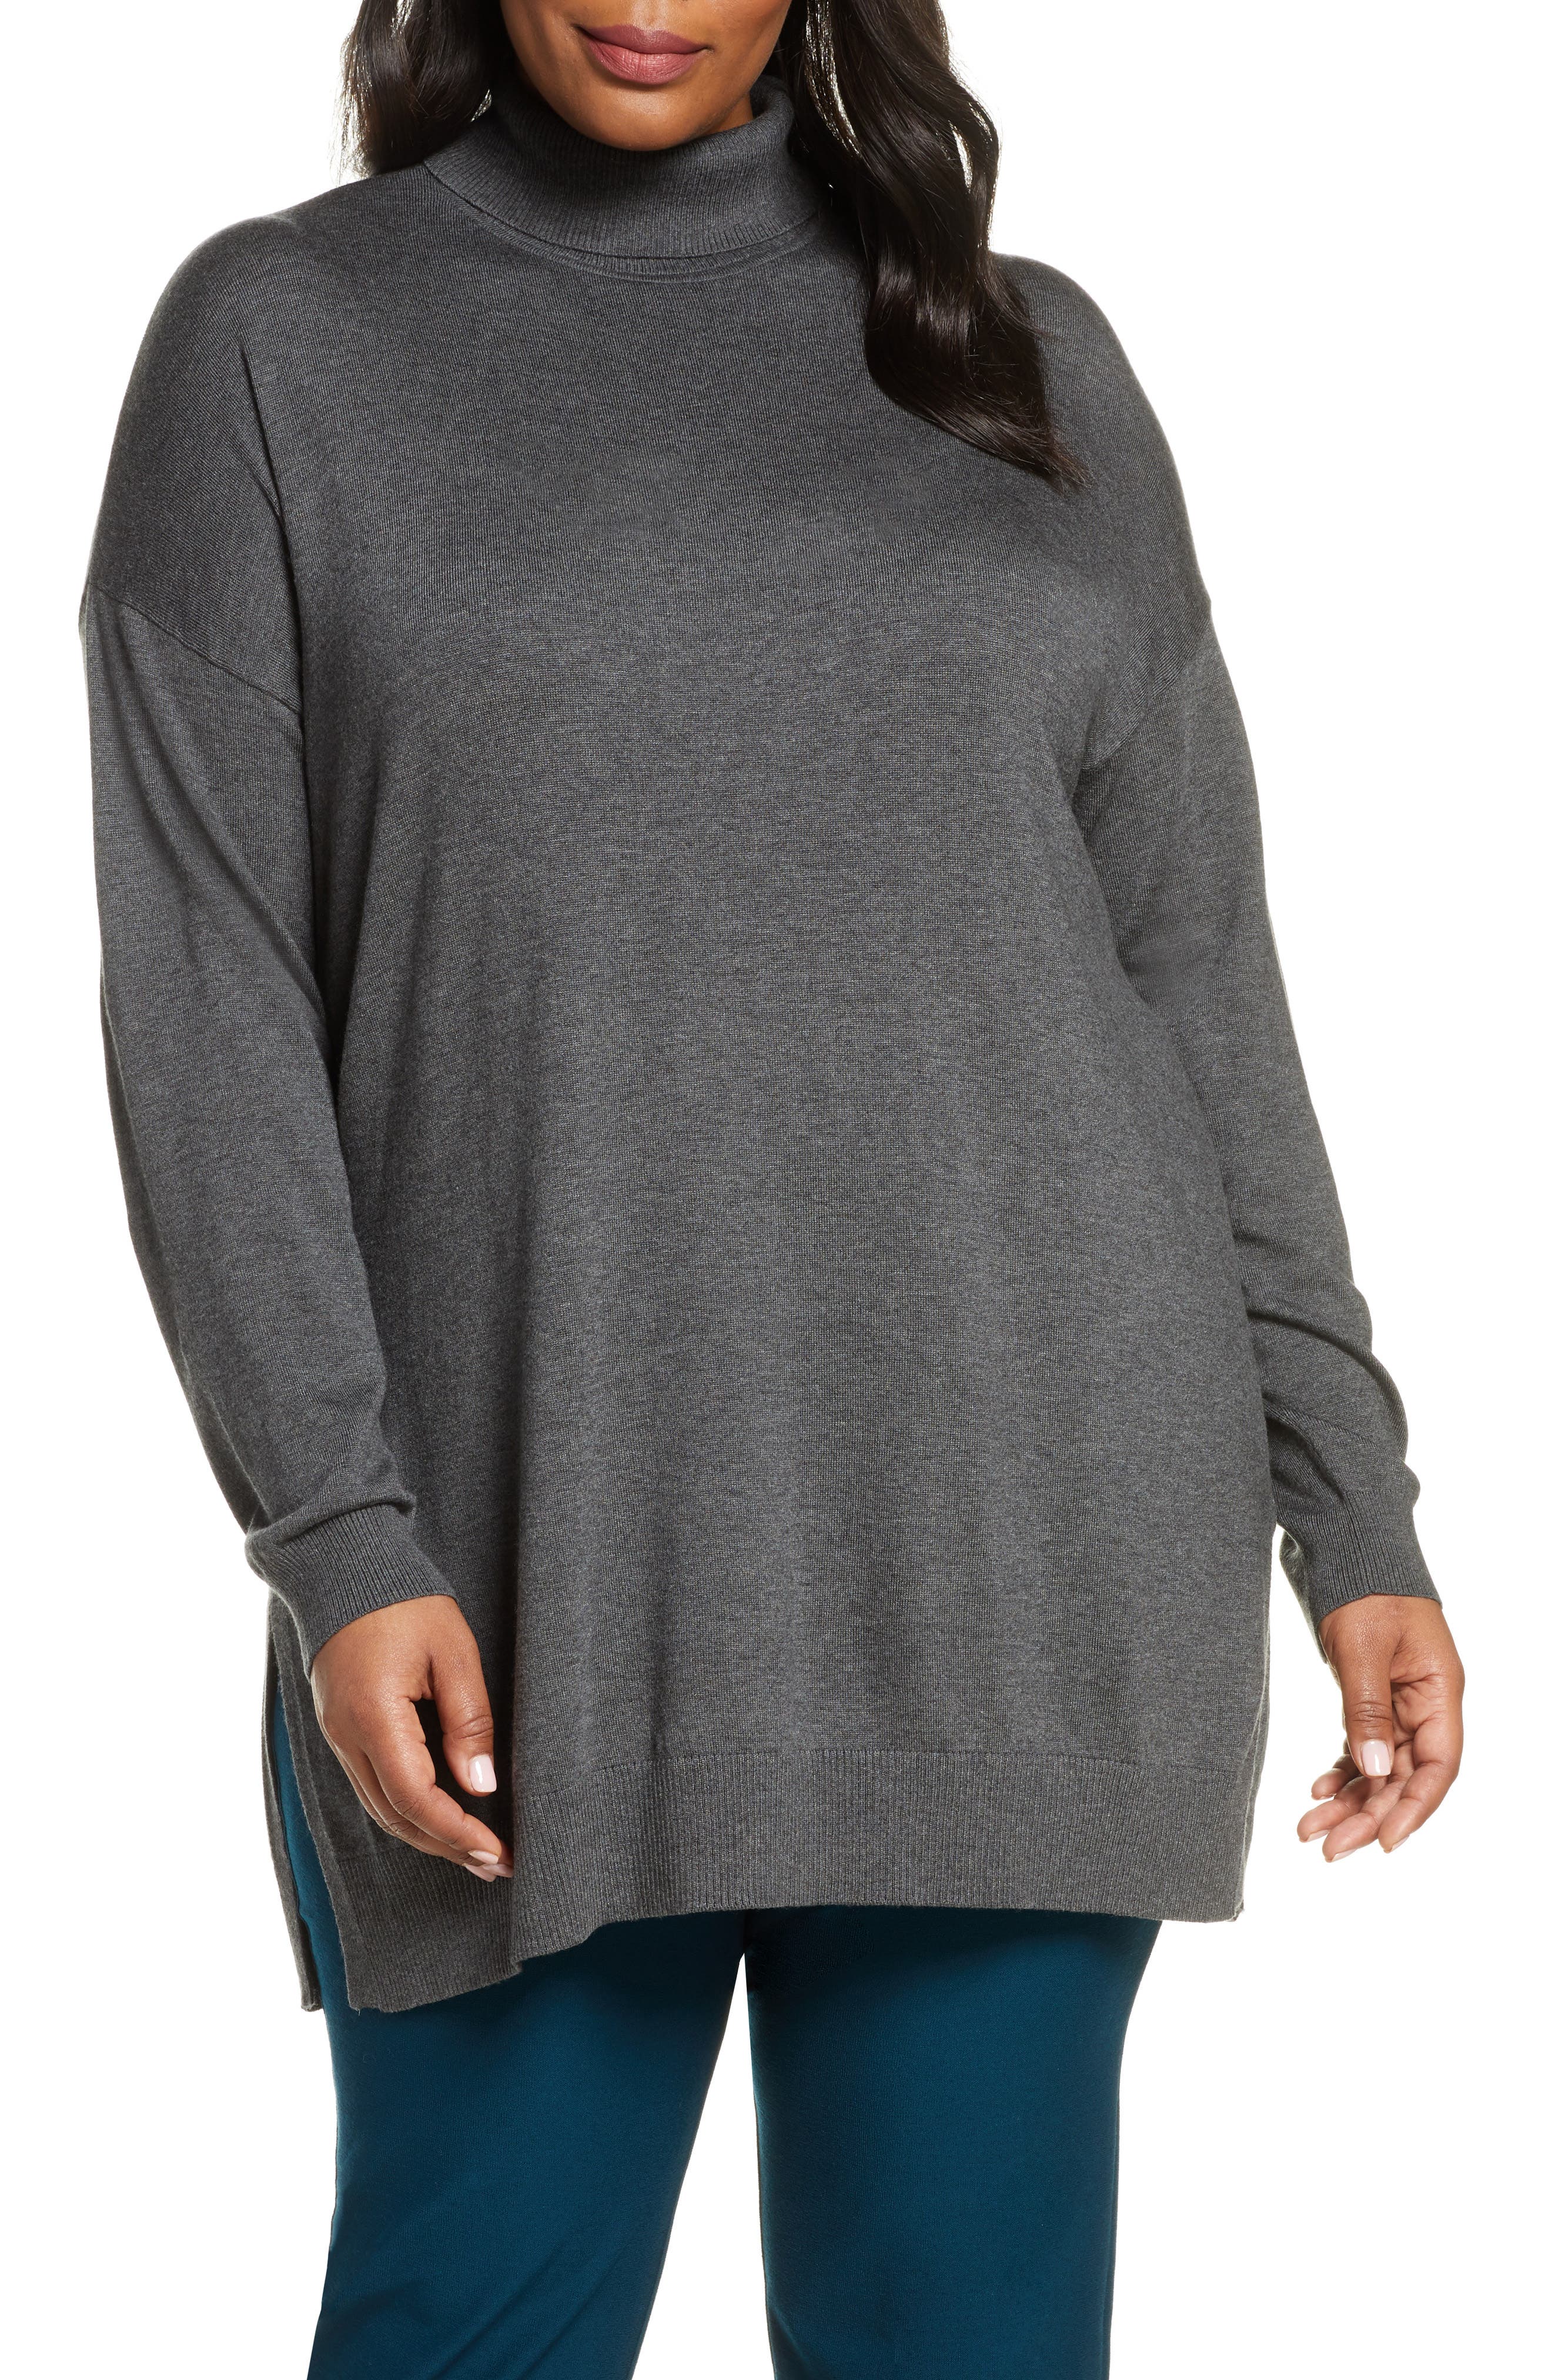 Eileen Fisher Sweater Size Chart